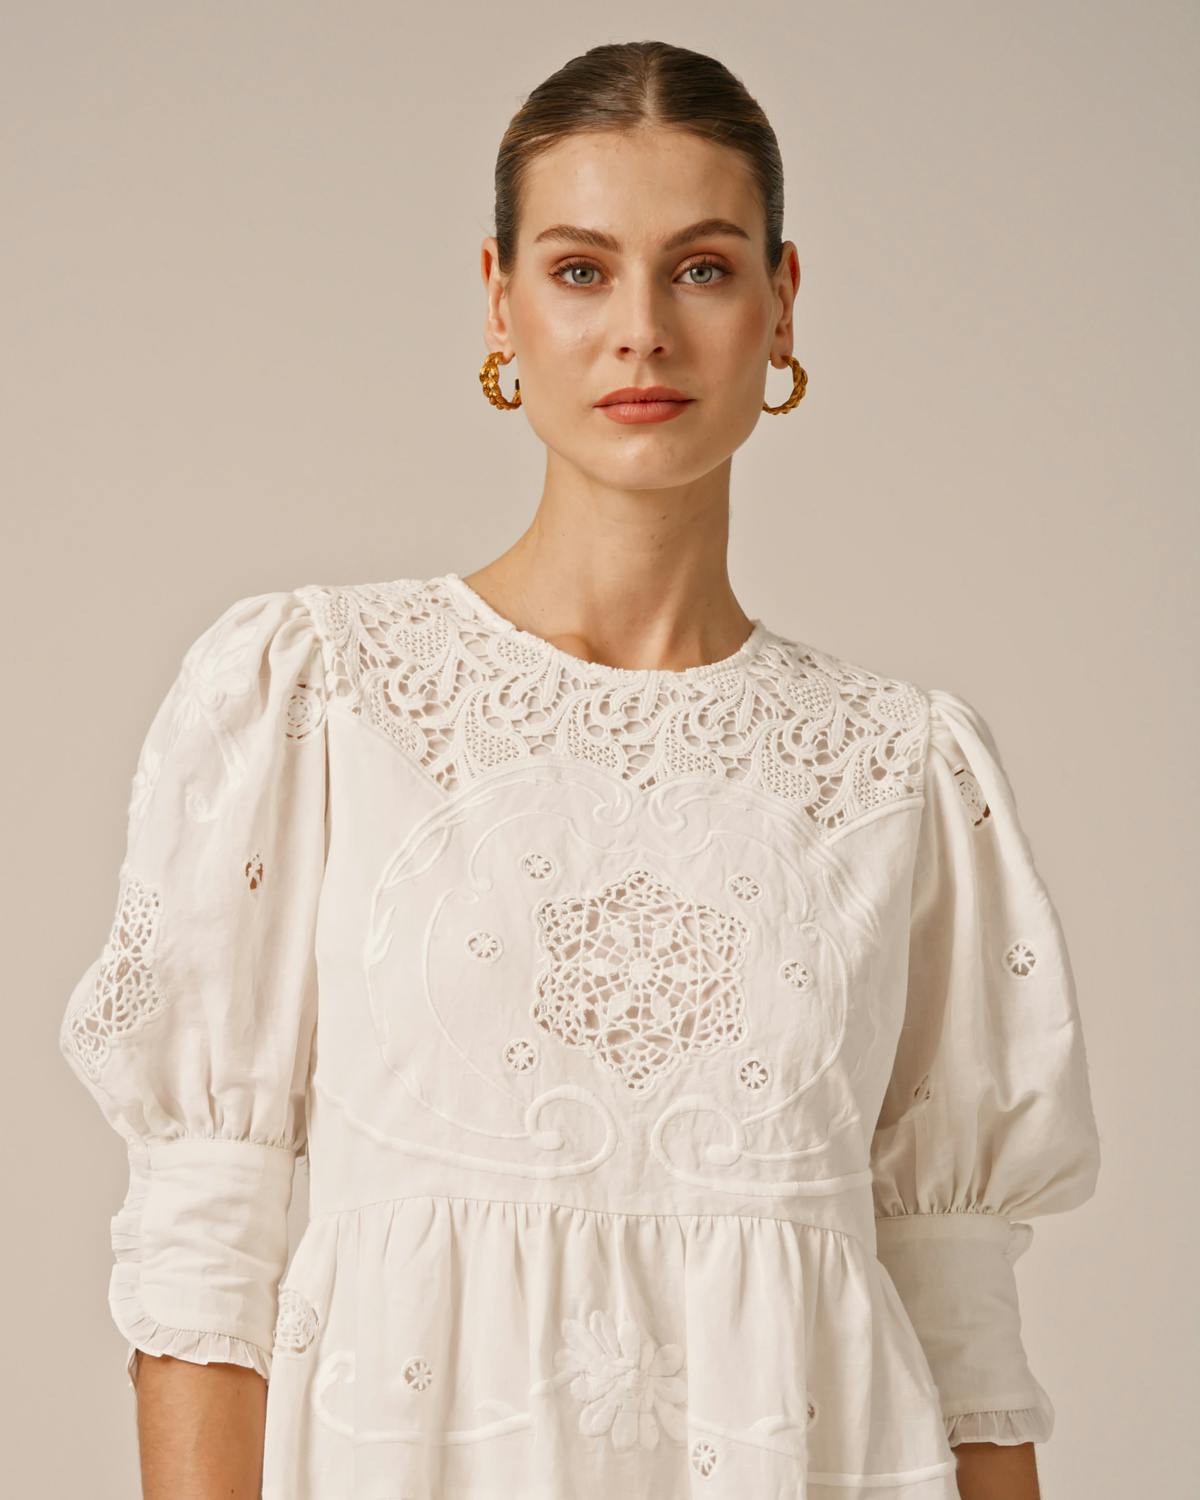 Linen Embroidery Gown, White. Image #6